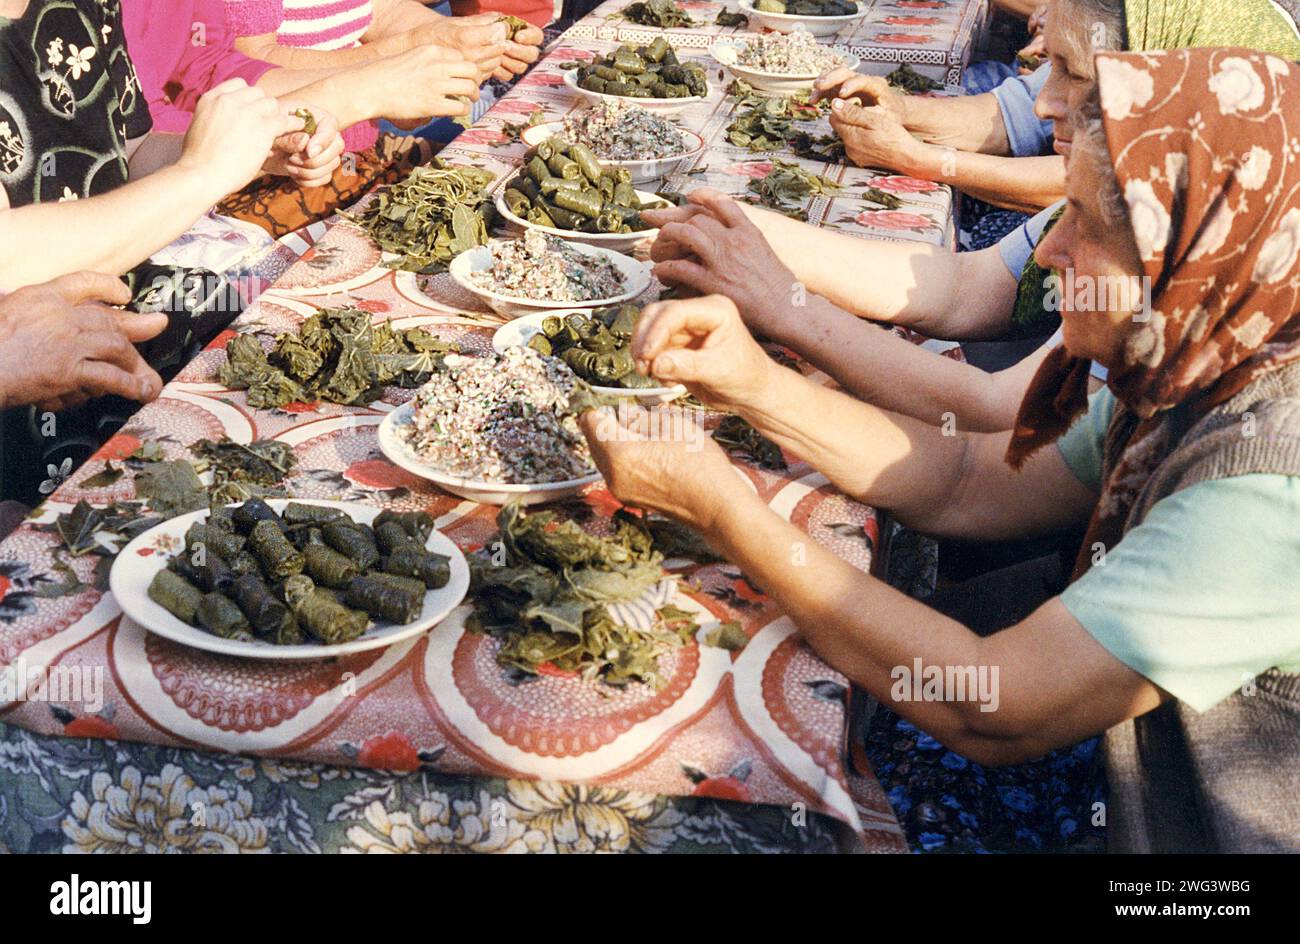 Vrancea County, Romania, approx. 1998. A group of local women preparing the traditional grape leaves rolls for an event. Stock Photo